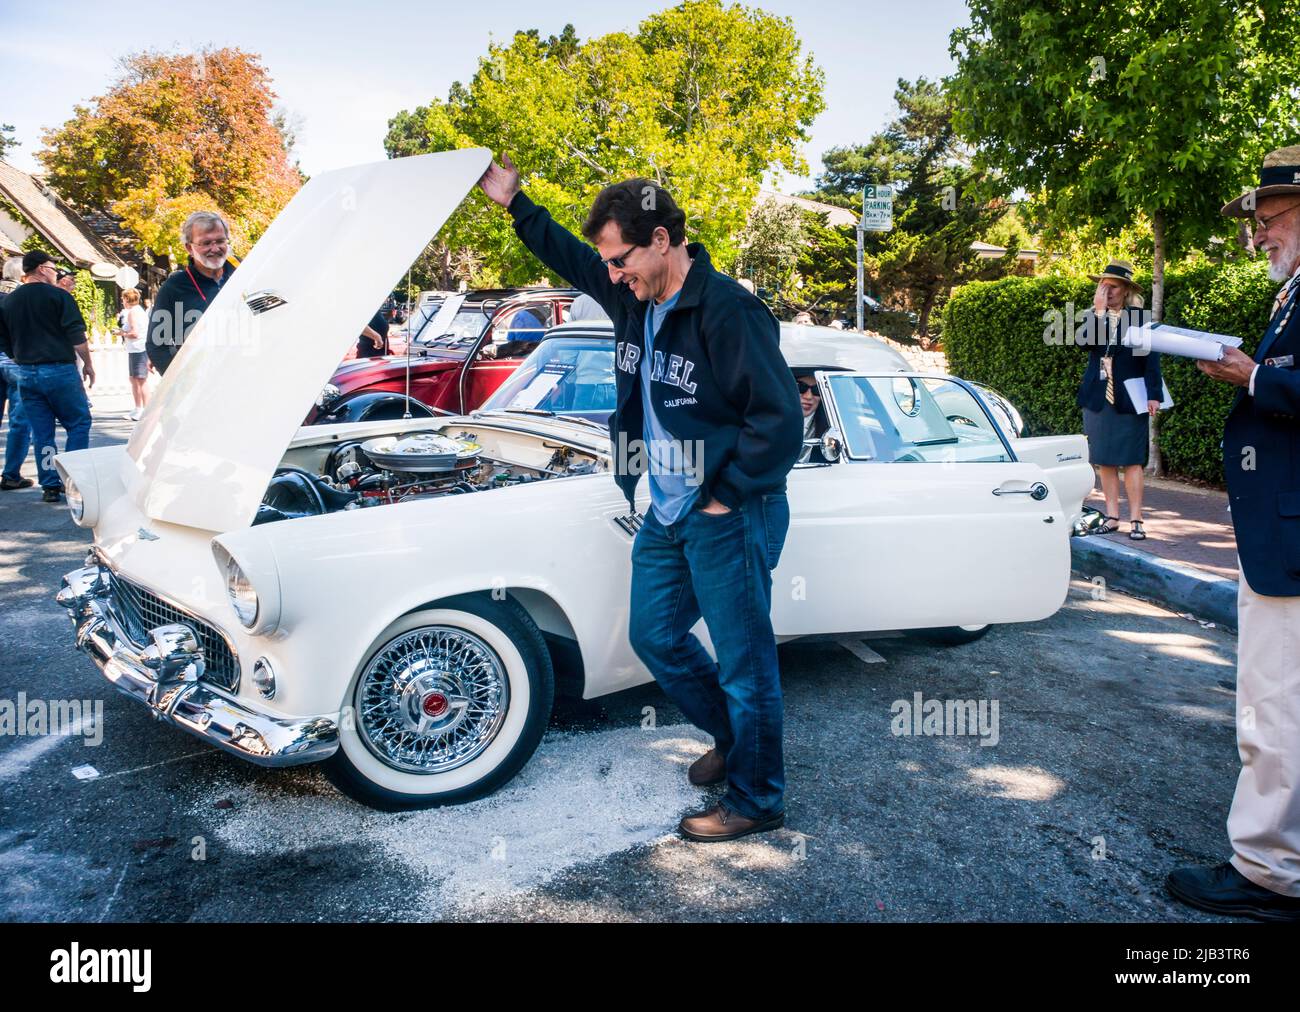 A car is evaluated at the Carmel-by-the-Sea Concours on the Avenue during Monterey Car Week Stock Photo